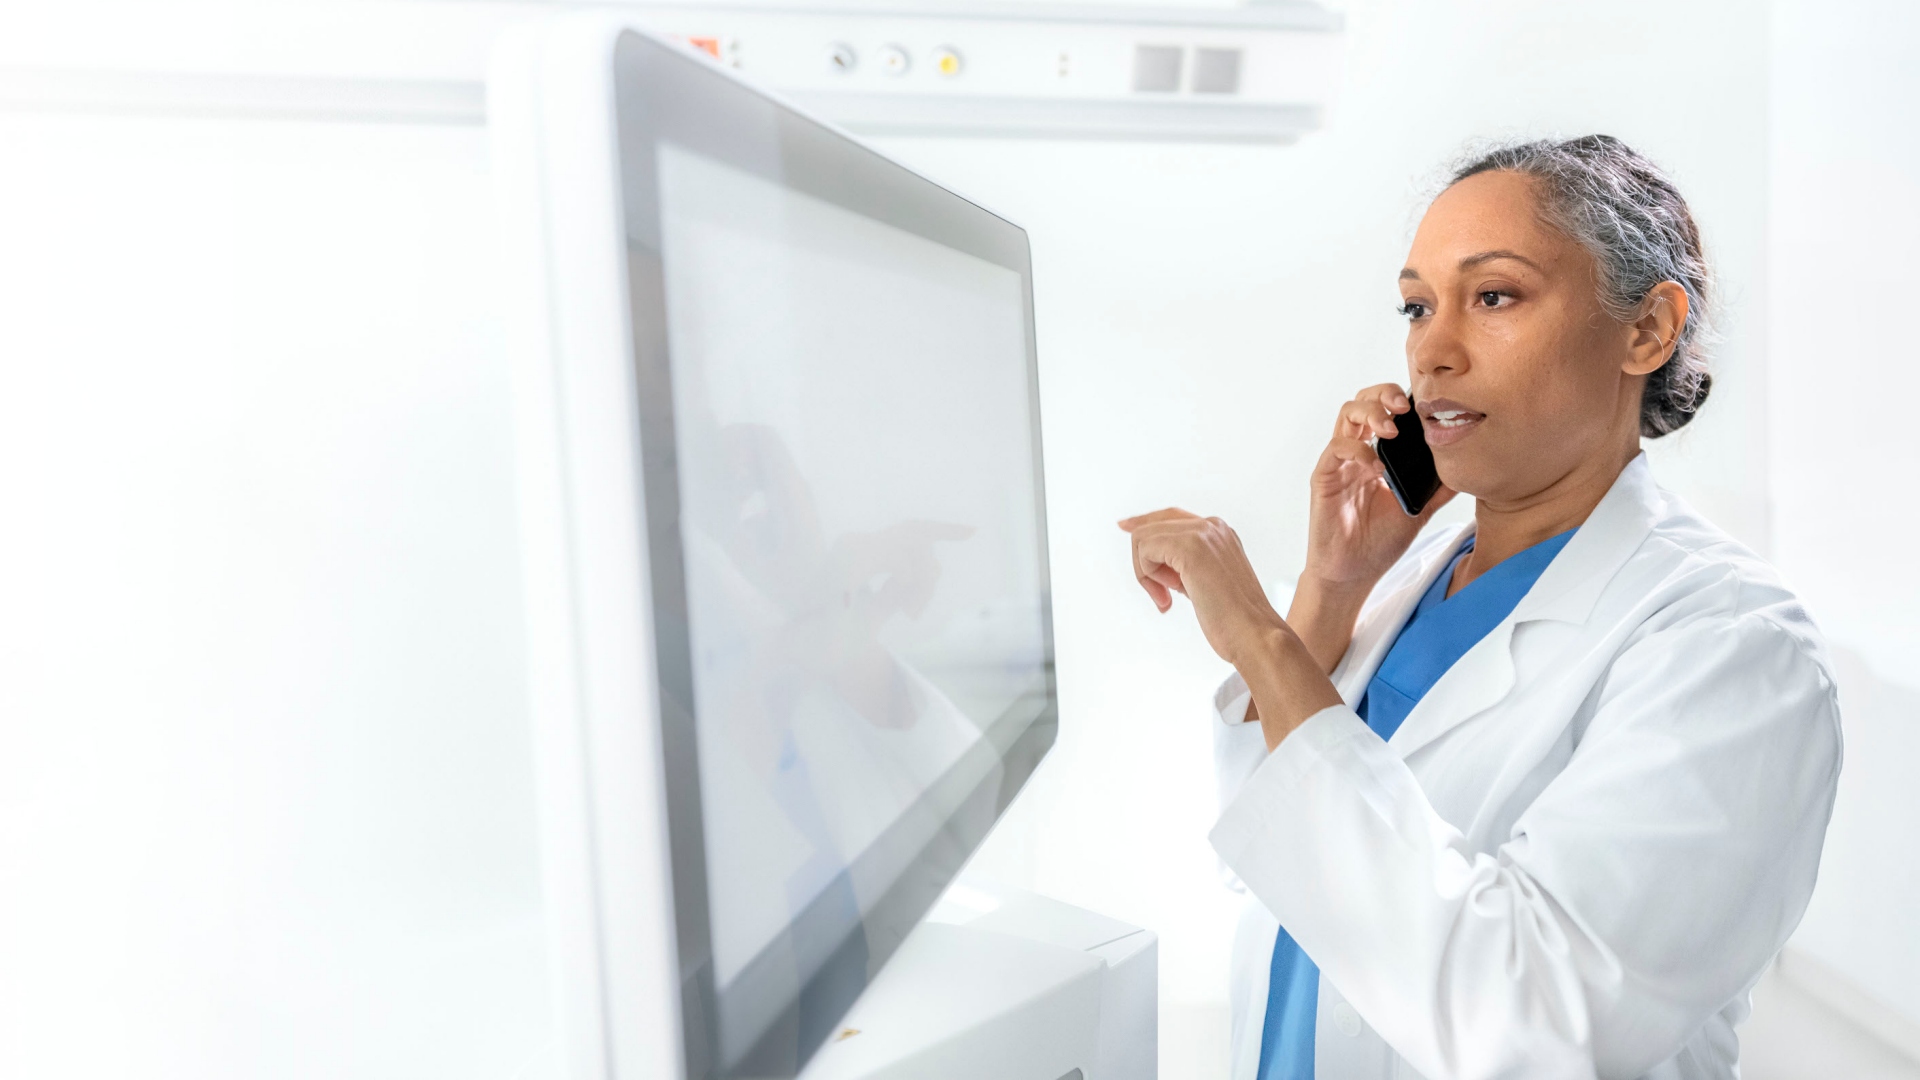 ZEISS for Health Care professionals: Enabling you to focus on patient care